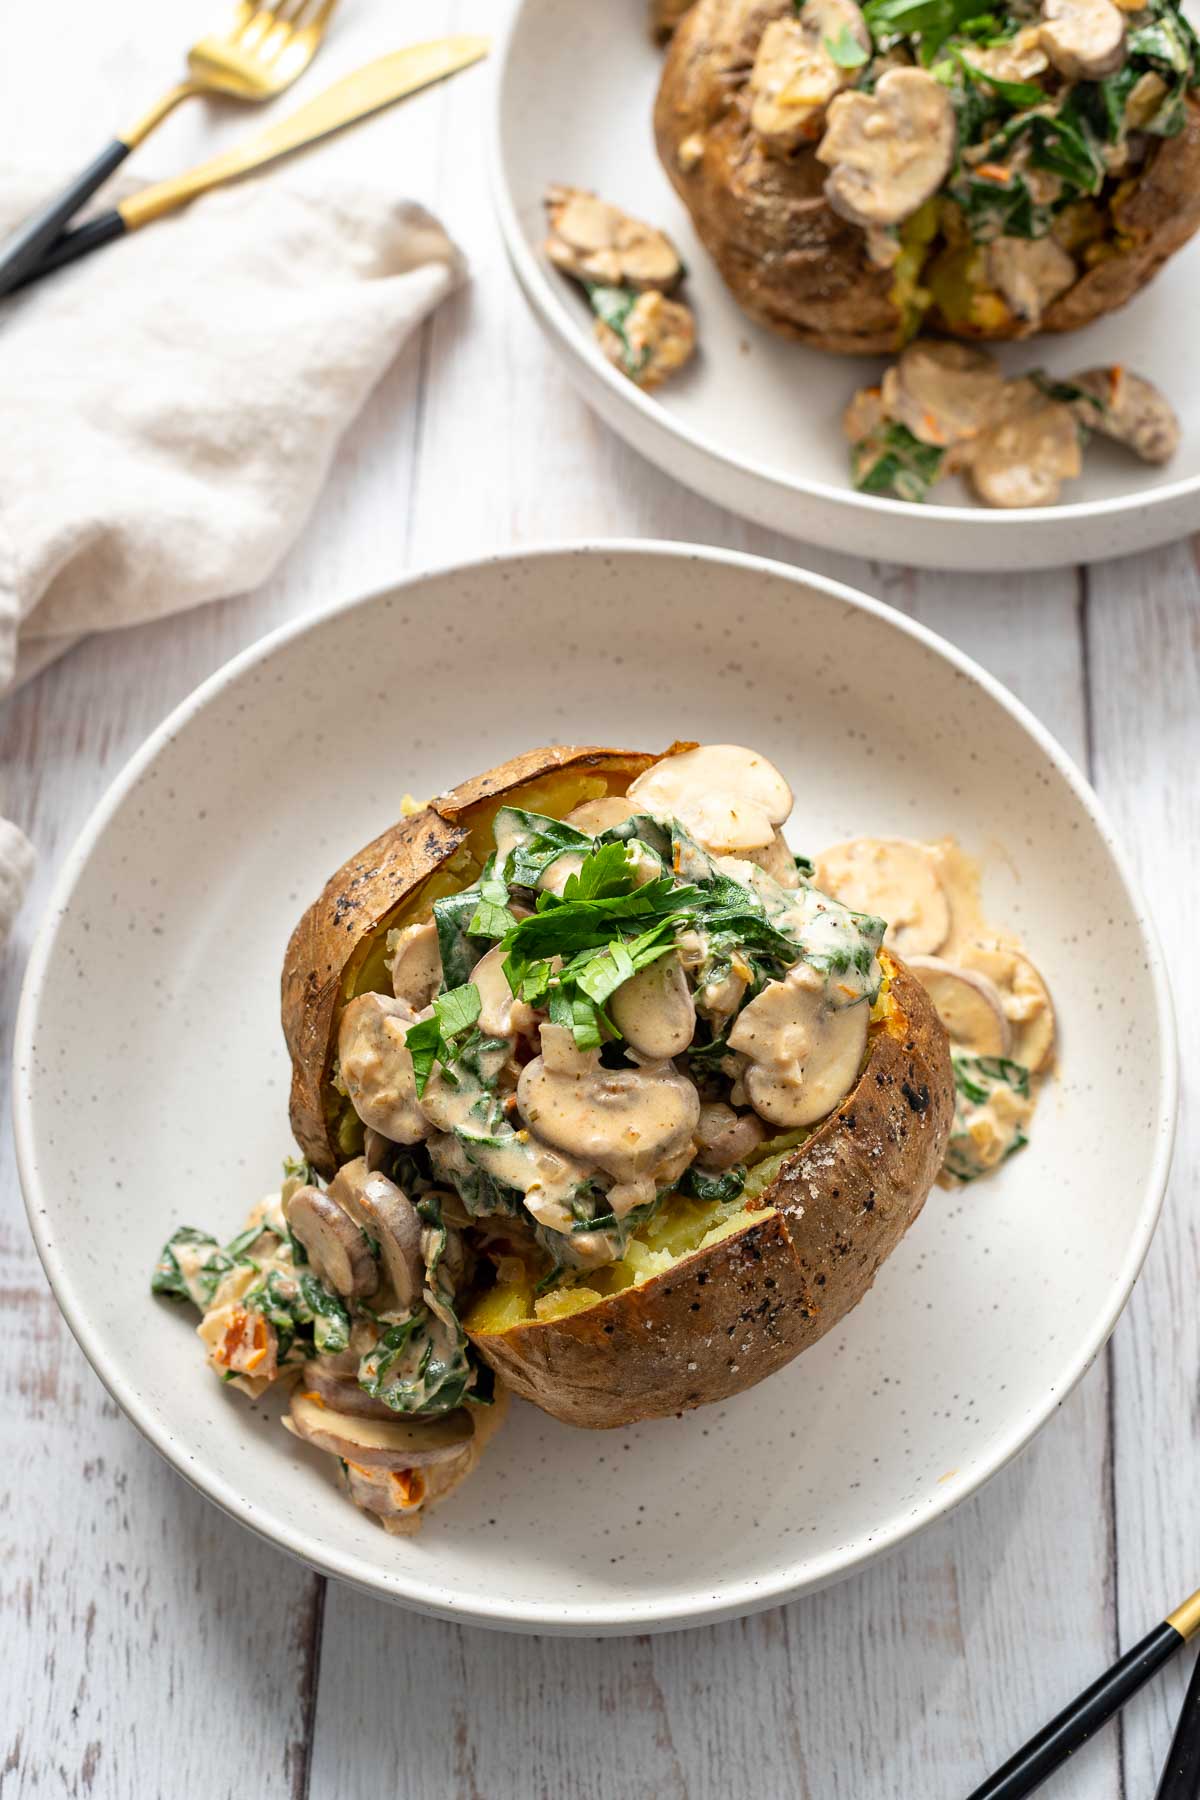 Baked Potatoes with Mushroom-Spinach Filling